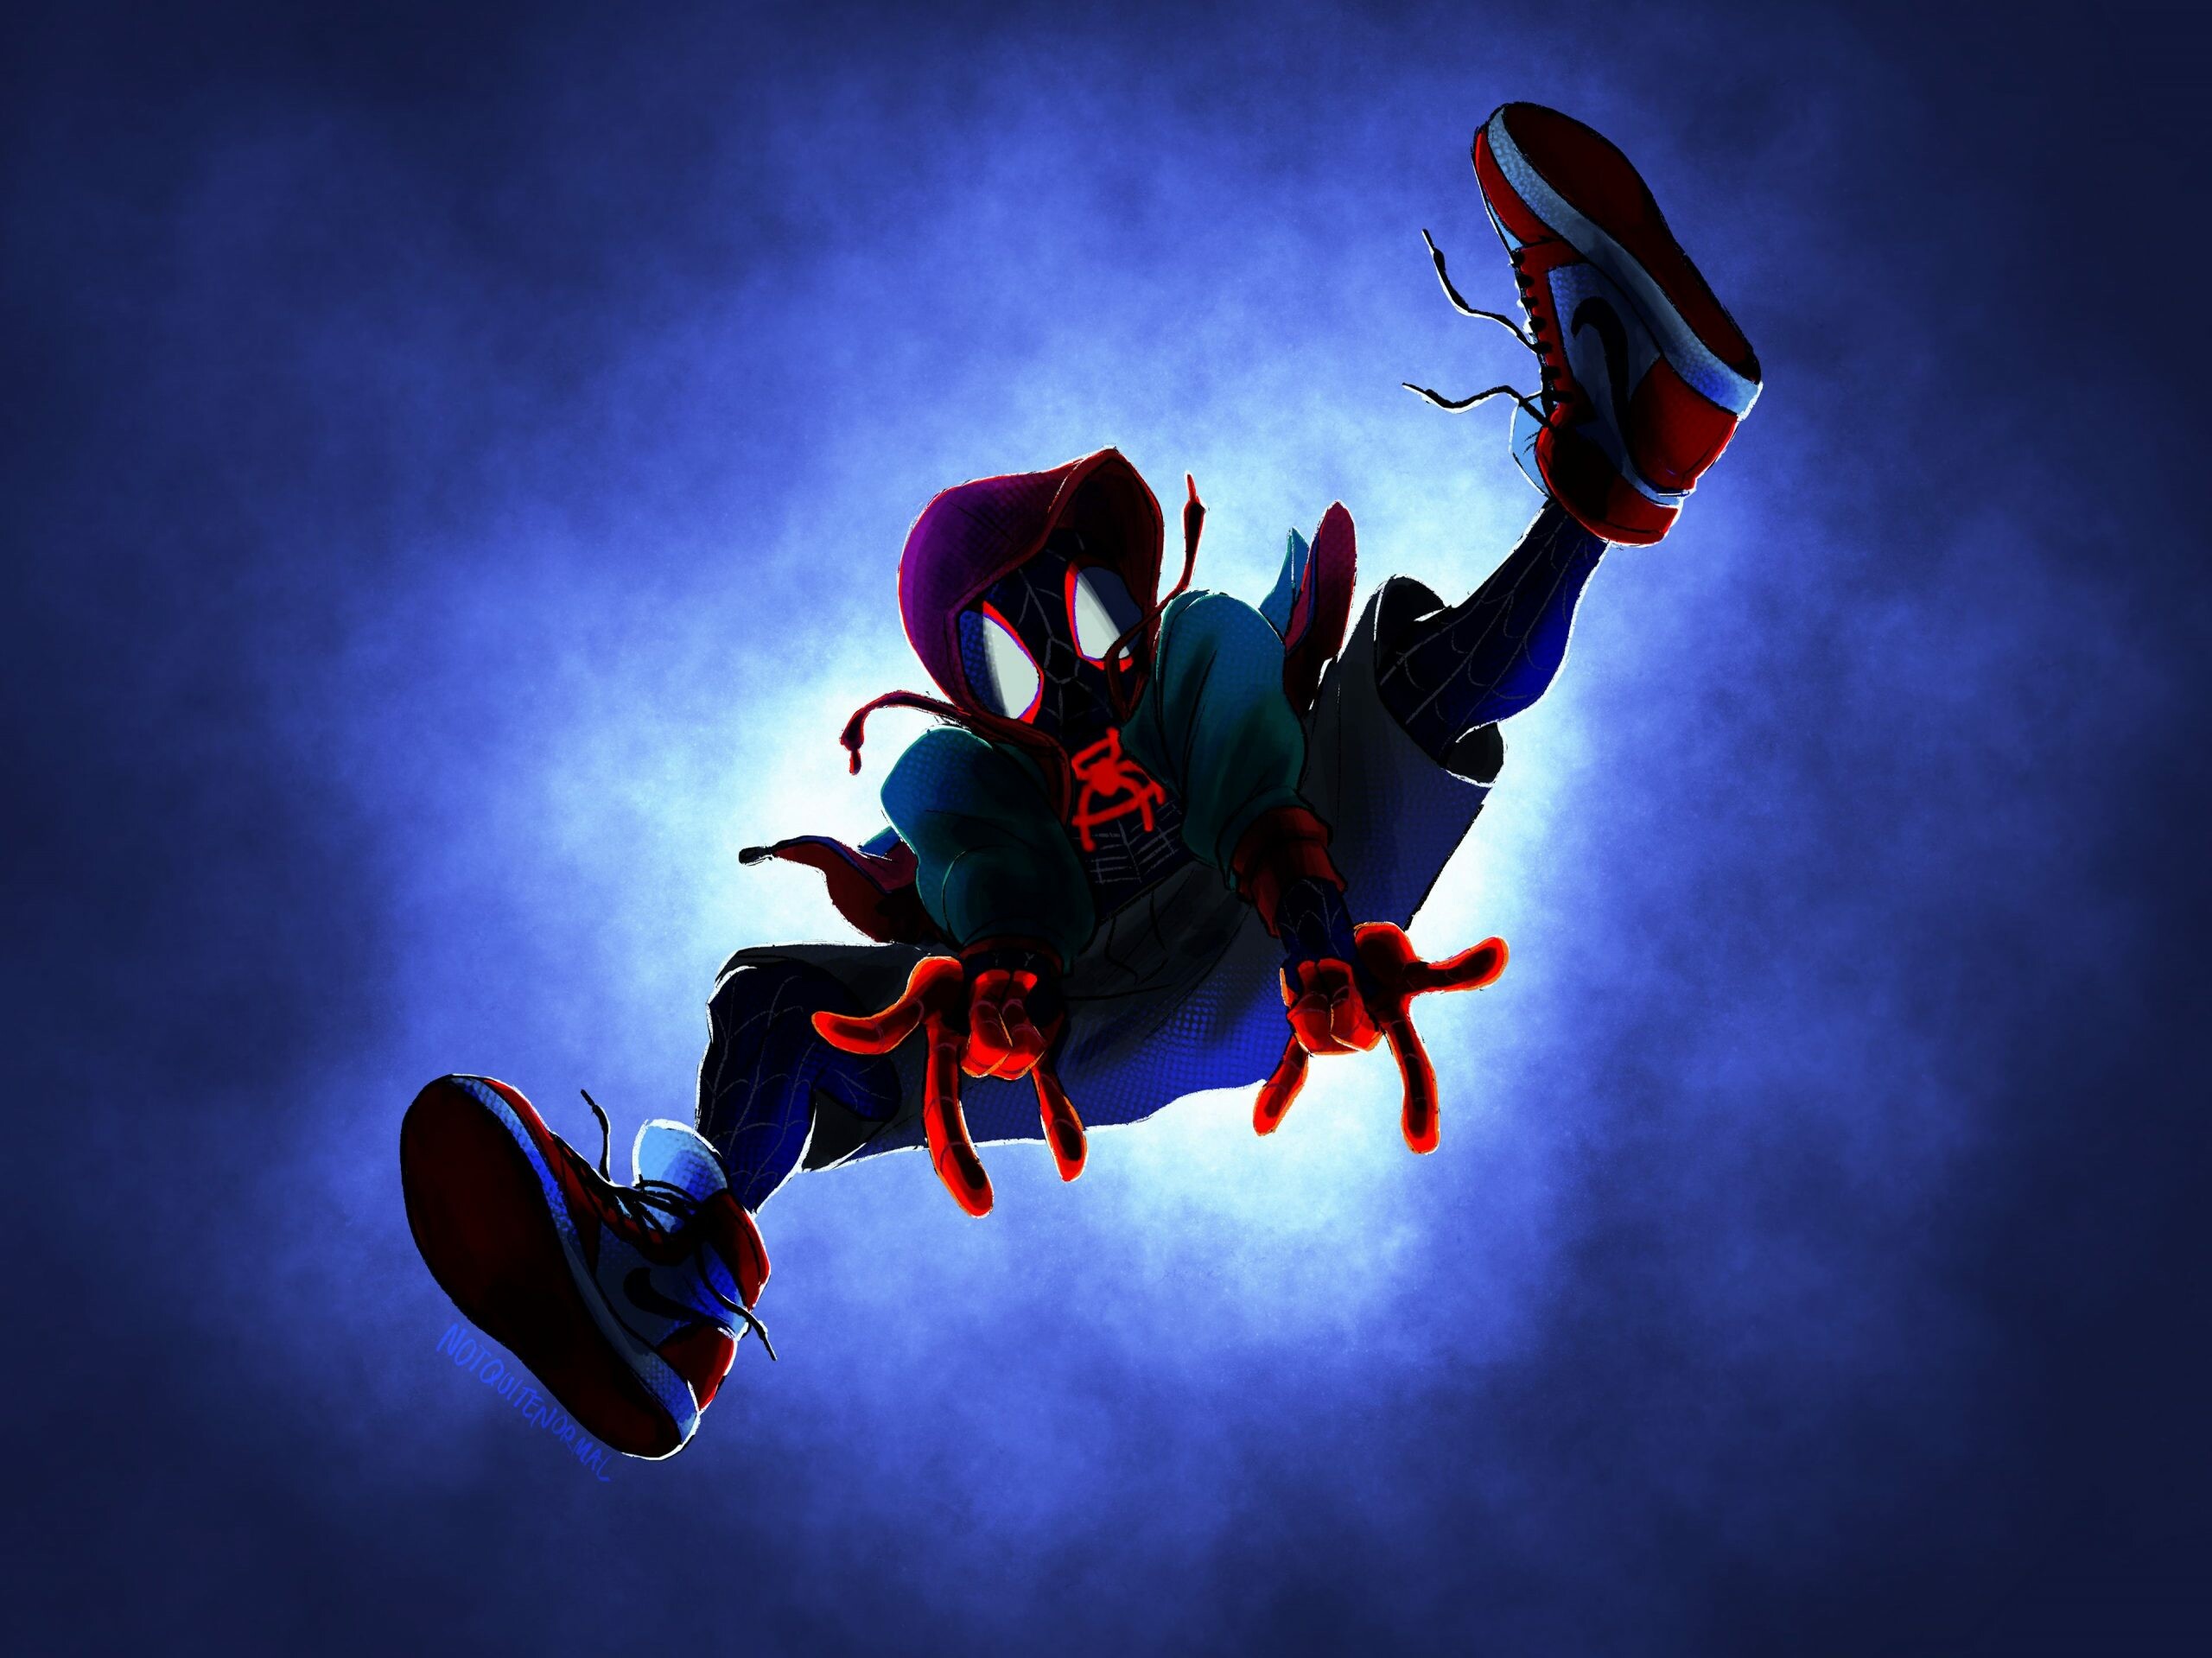 Spider-Man: Into the Spider-Verse: The film grossed $375.5 million worldwide against a $90 million budget. 2560x1920 HD Wallpaper.